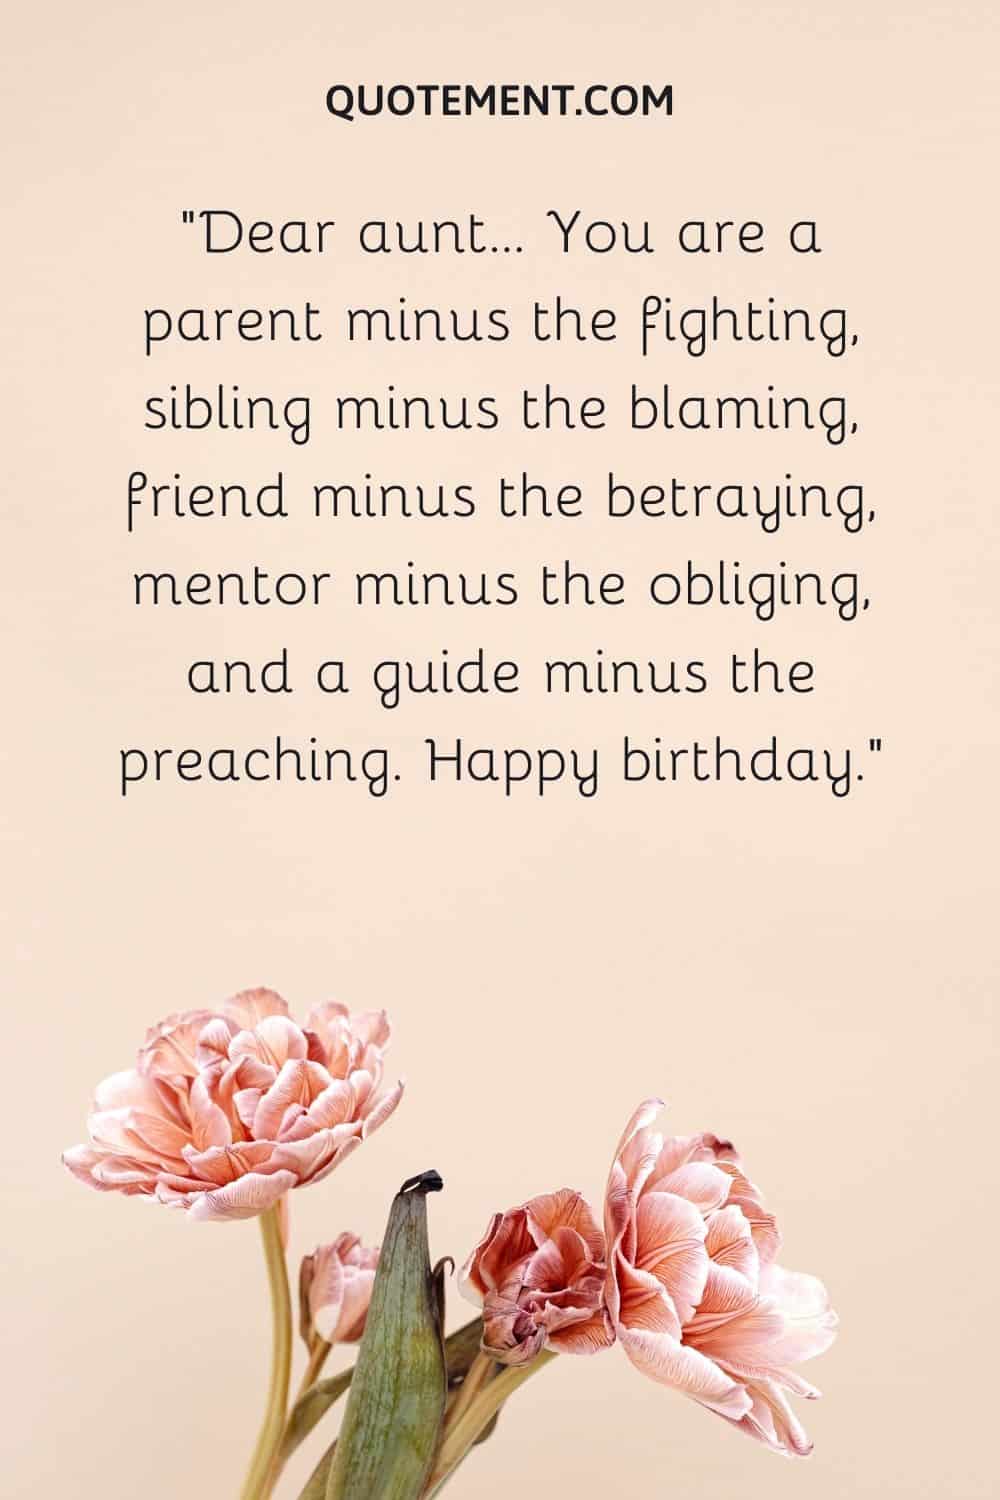 You are a parent minus the fighting, sibling minus the blaming, friend minus the betraying